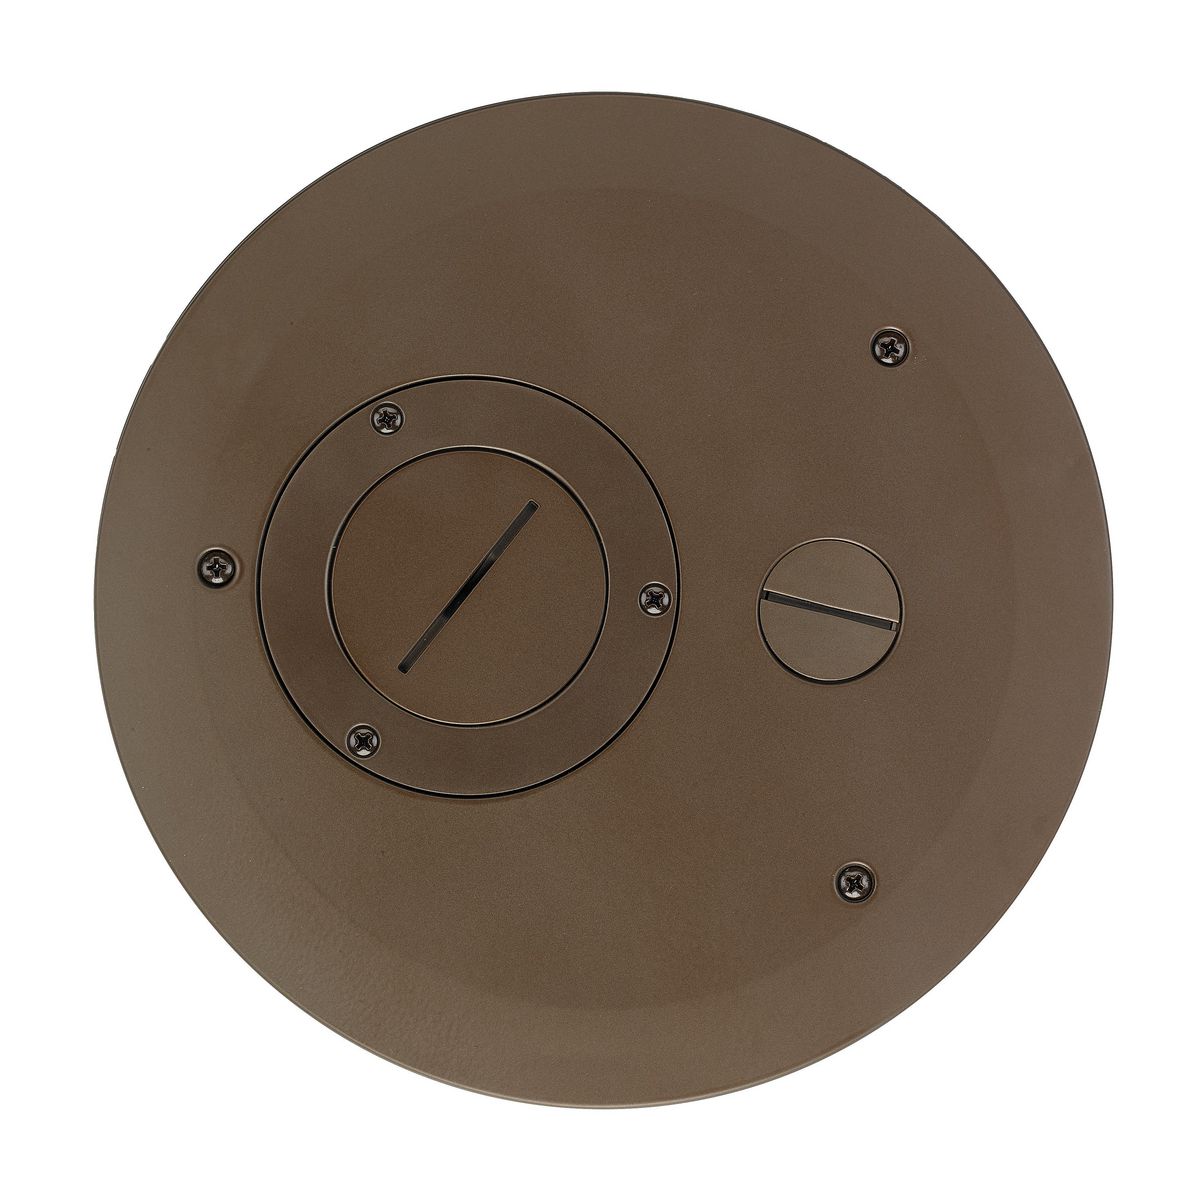 CFB ROUND 8 INCH FF COVER, BRONZE